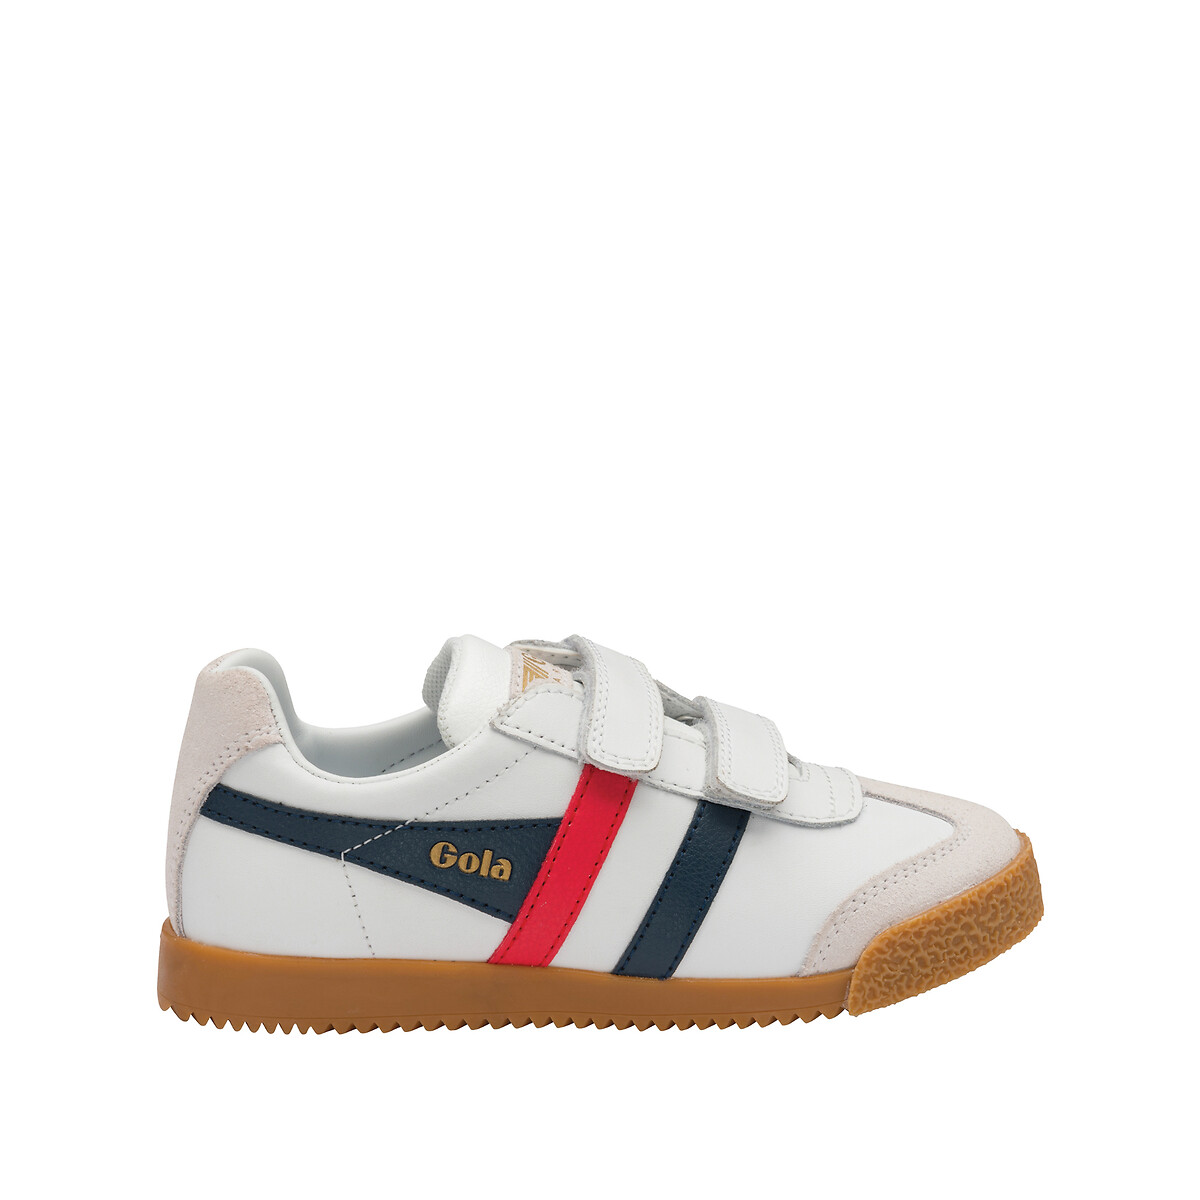 Kids Harrier Leather Strap Trainers with Touch ’n’ Close Fastening